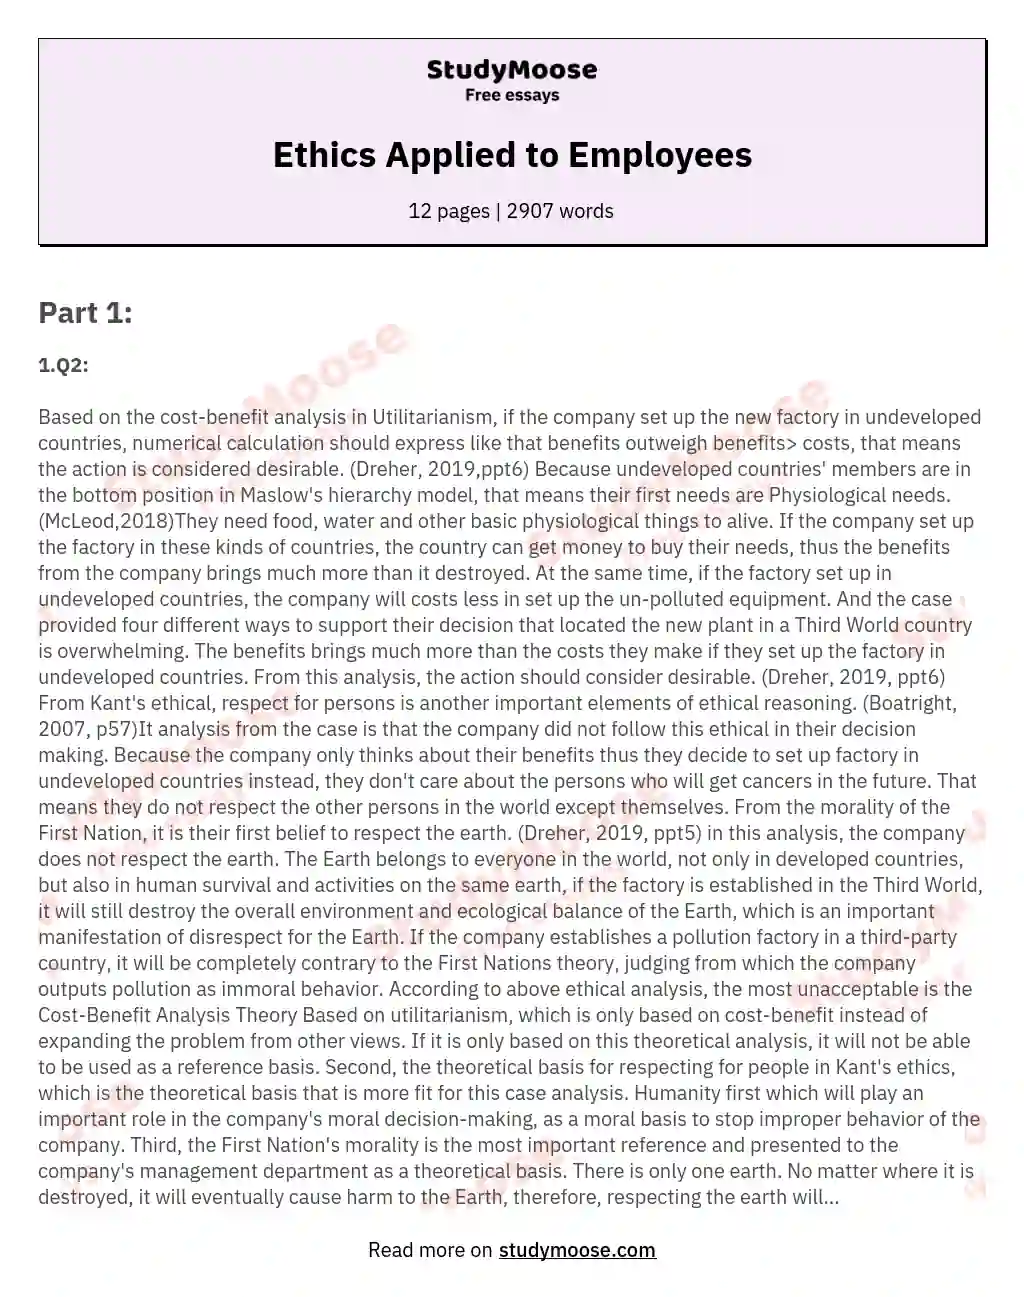 Ethics Applied to Employees essay